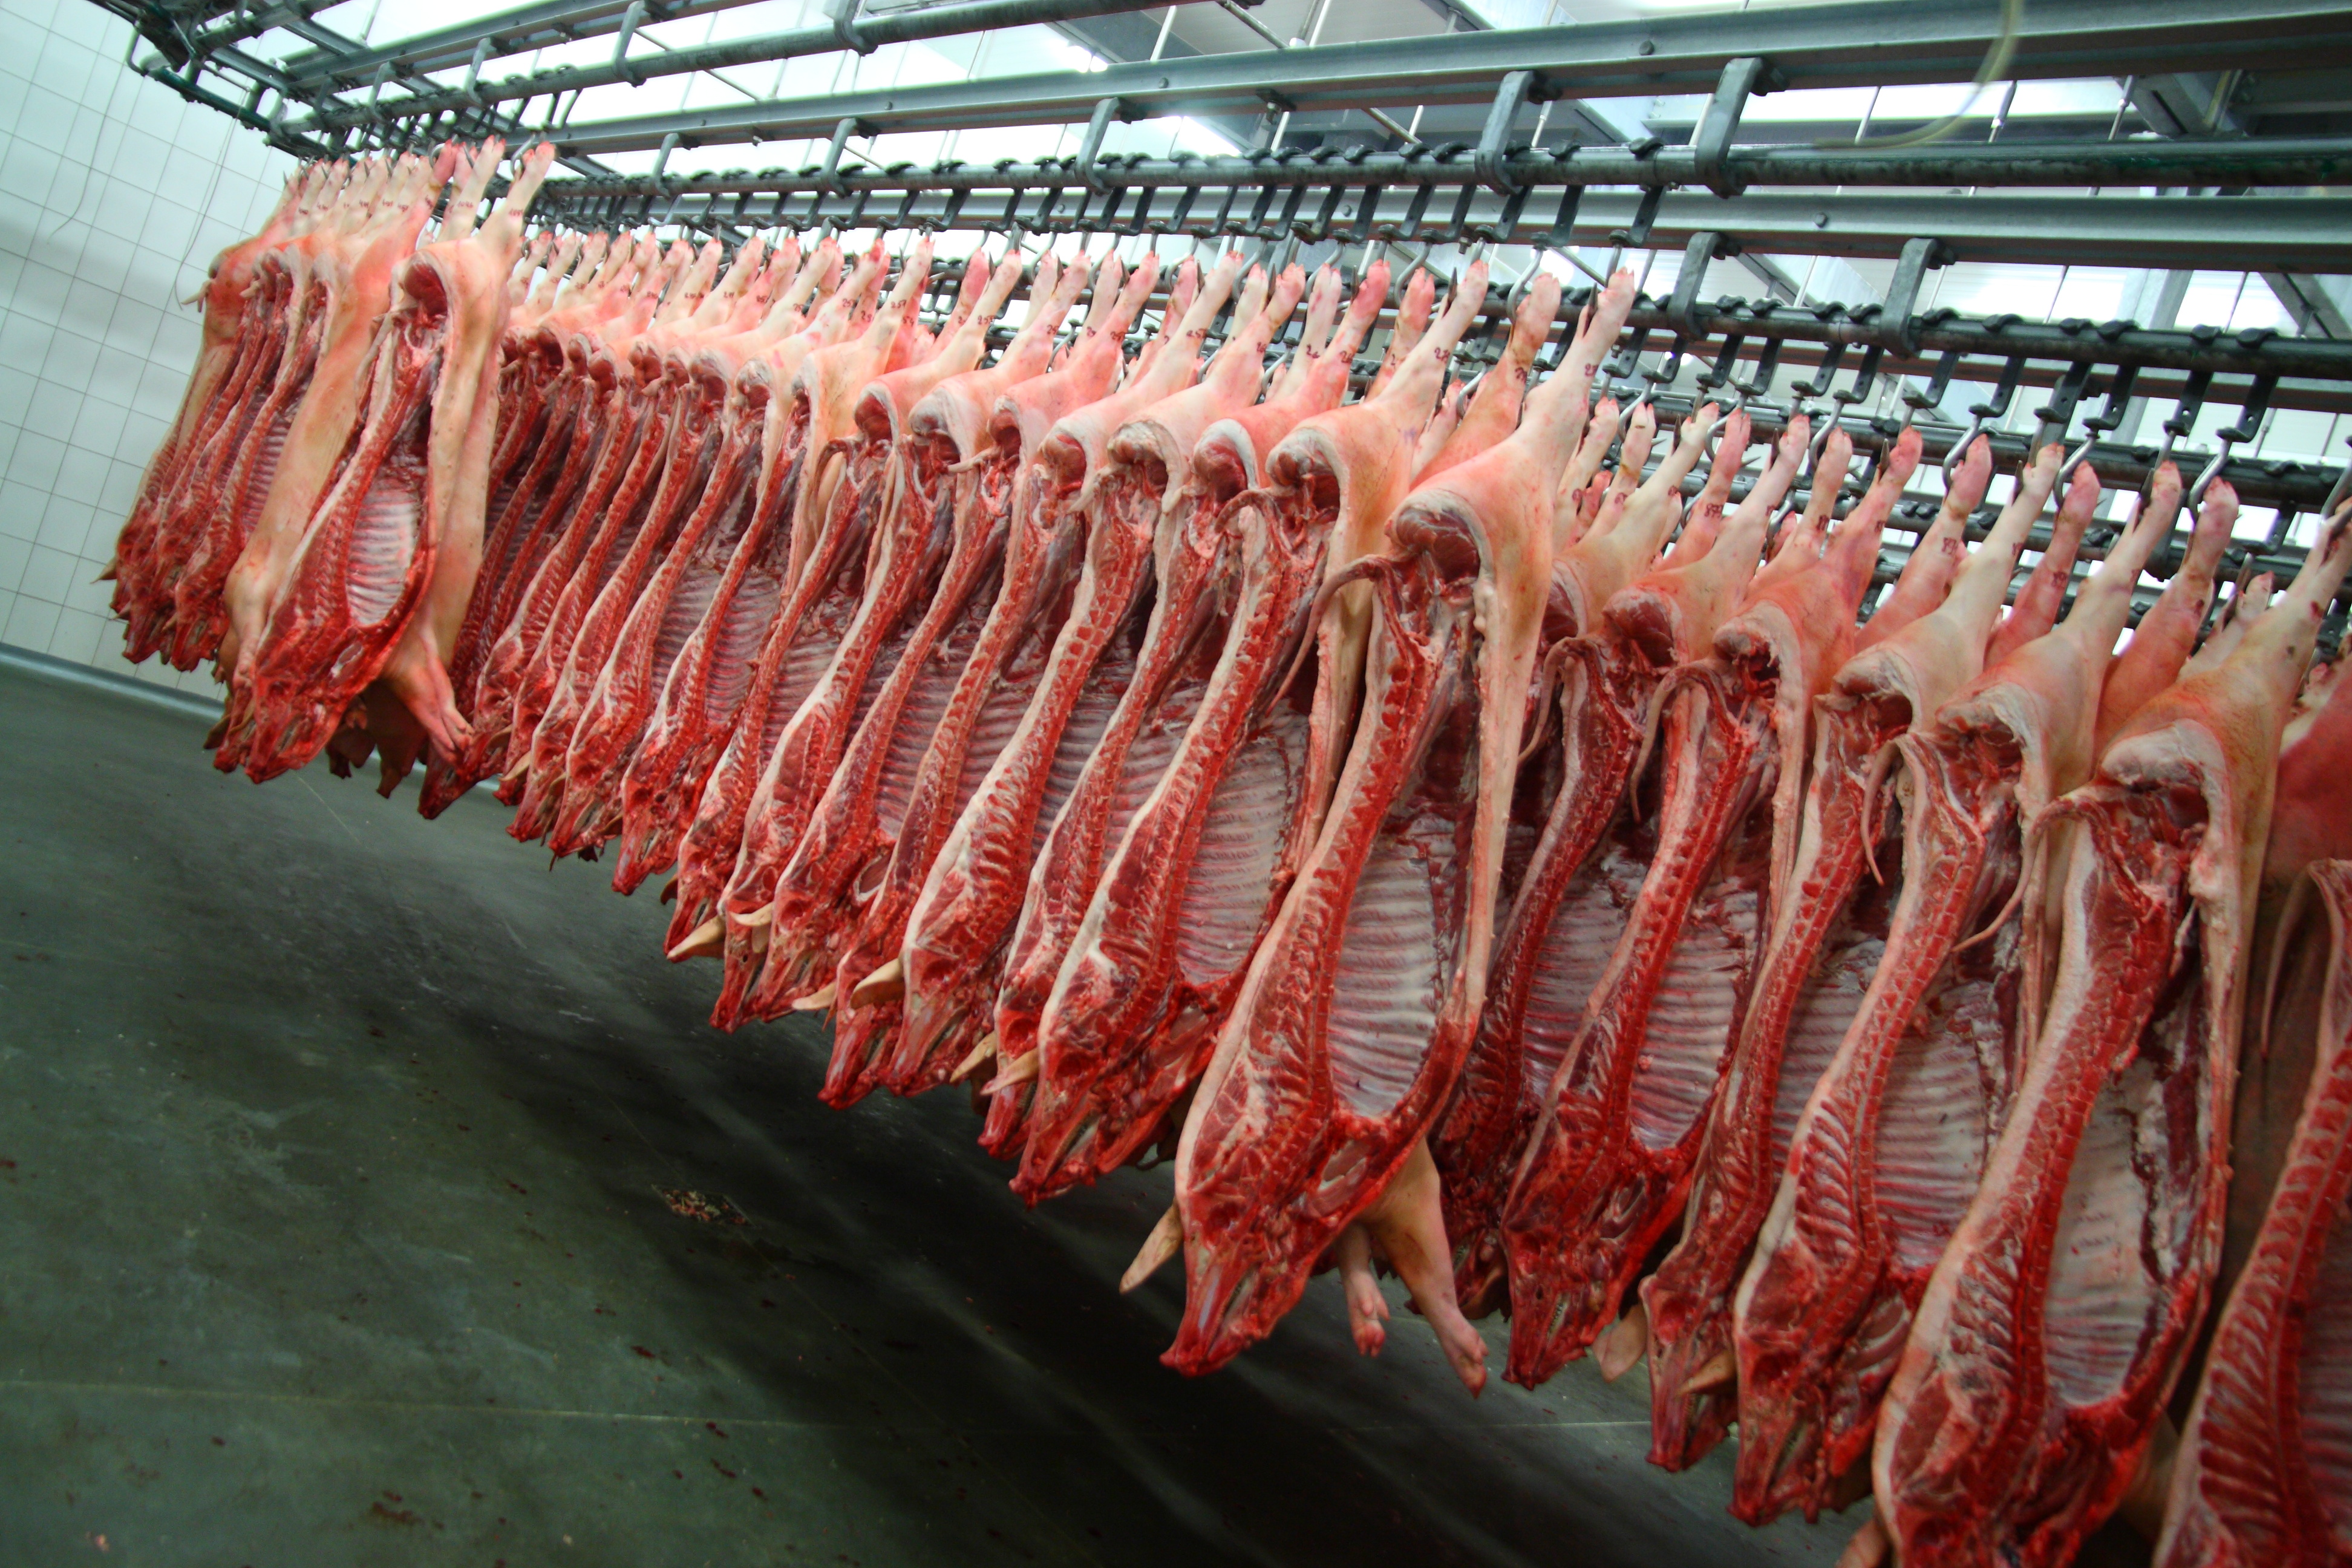 pig carcases hanging in a freezer